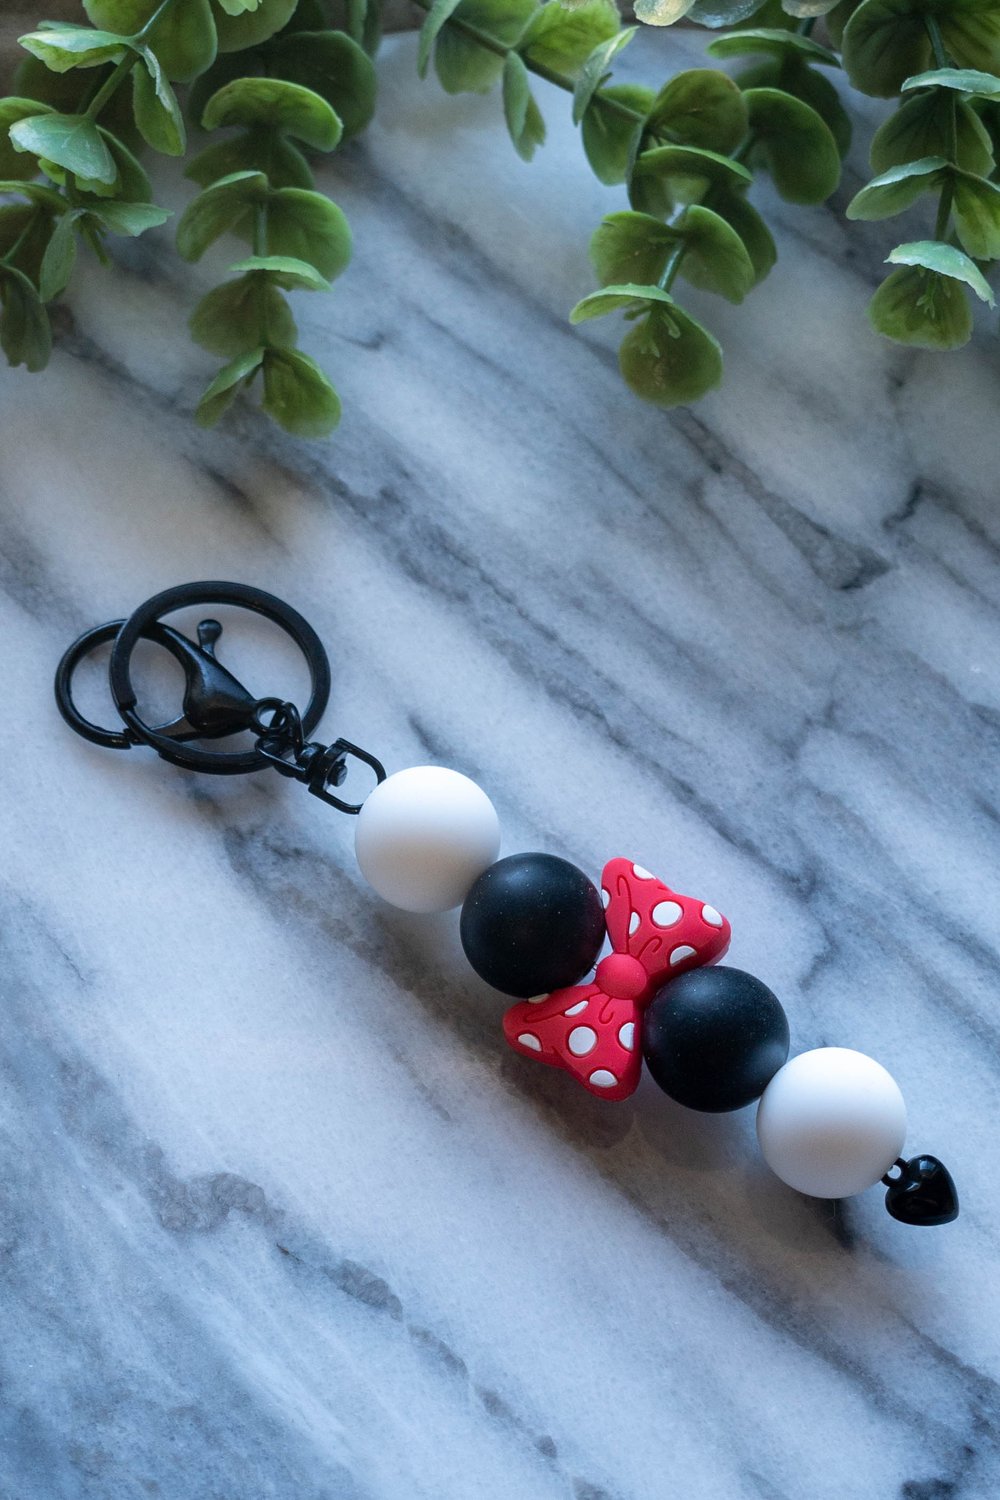 LV x MickeyMouse Keychain - Red Bow